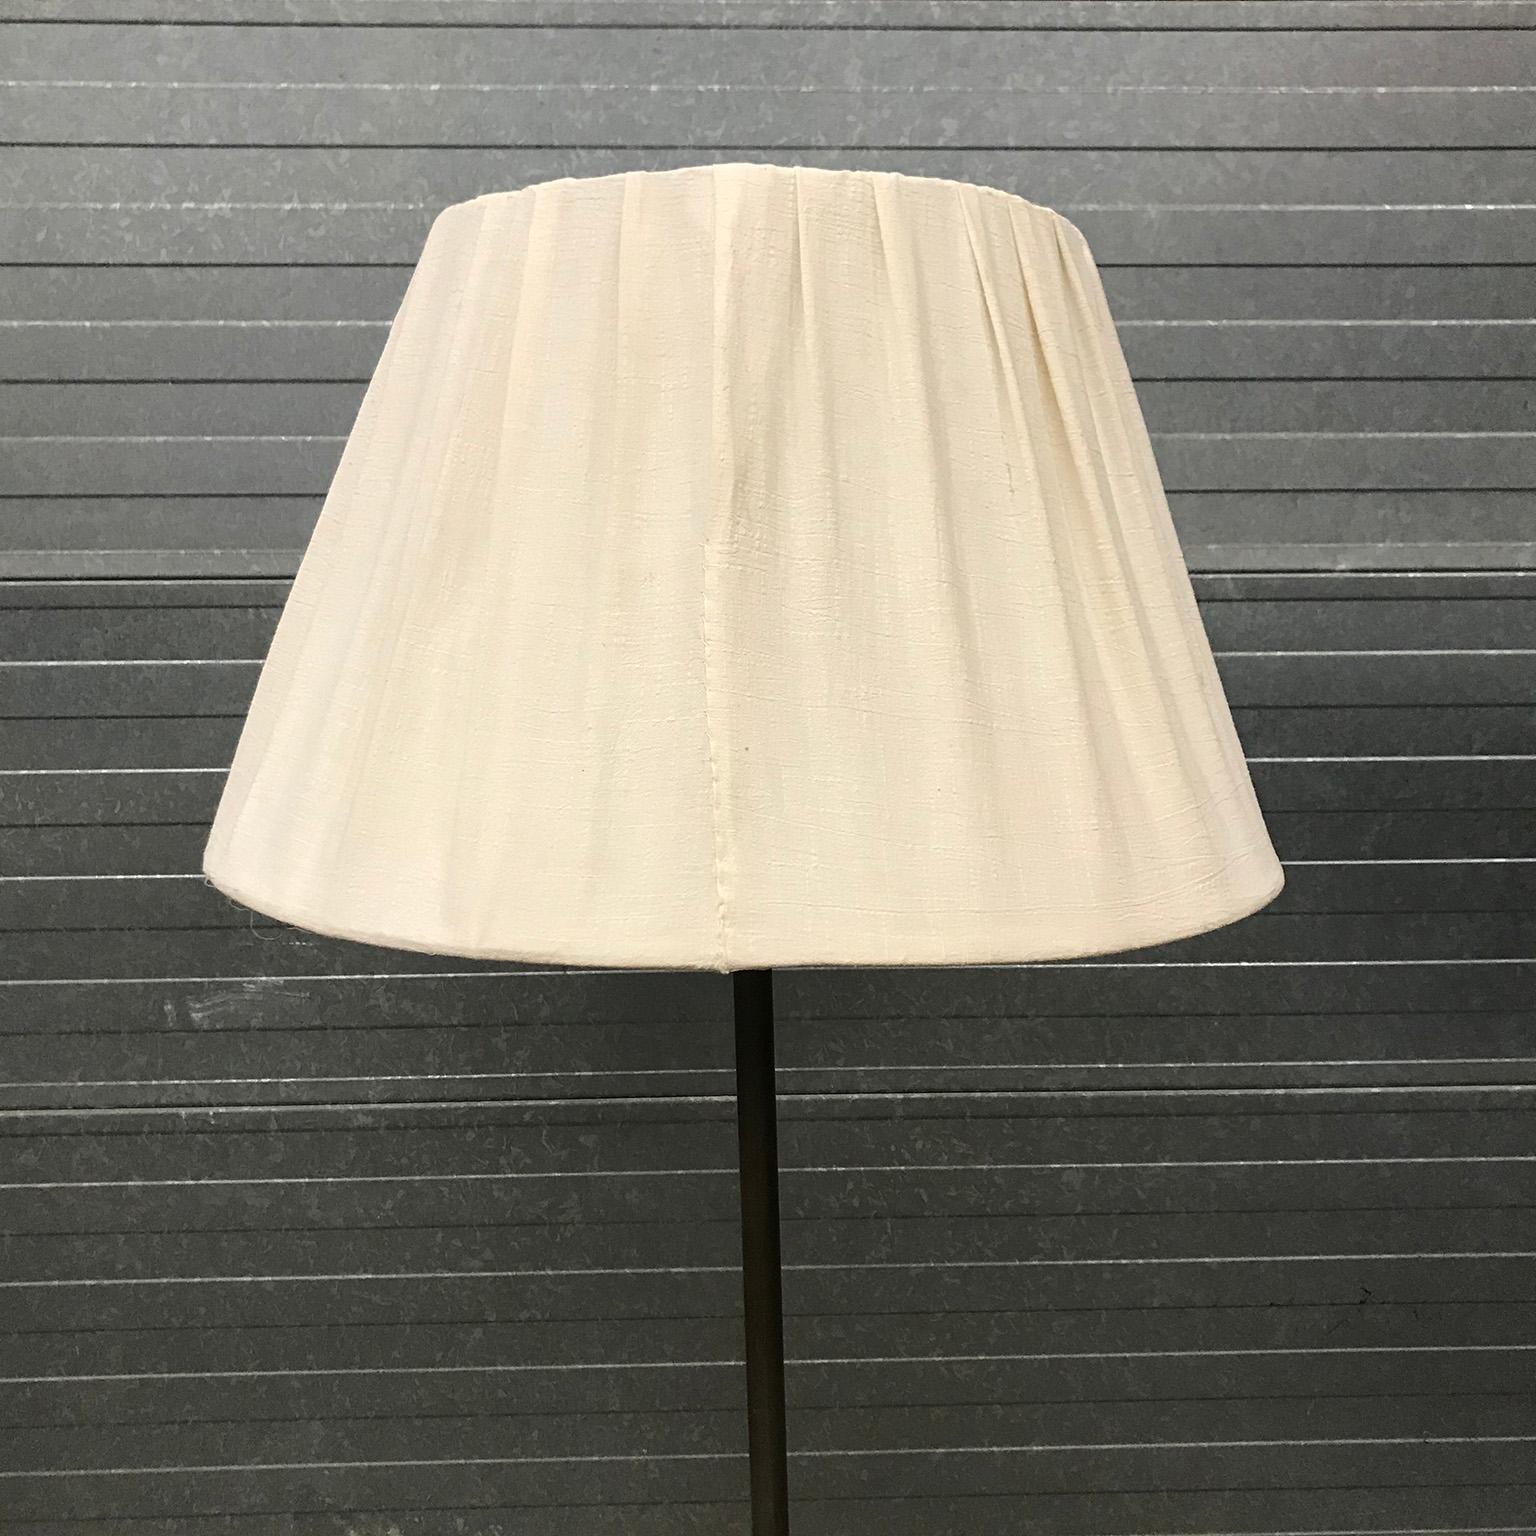 Mid-Century Modern 1935, W.H. Gispen Lamp 6004 or 640b in Fair Condition For Sale